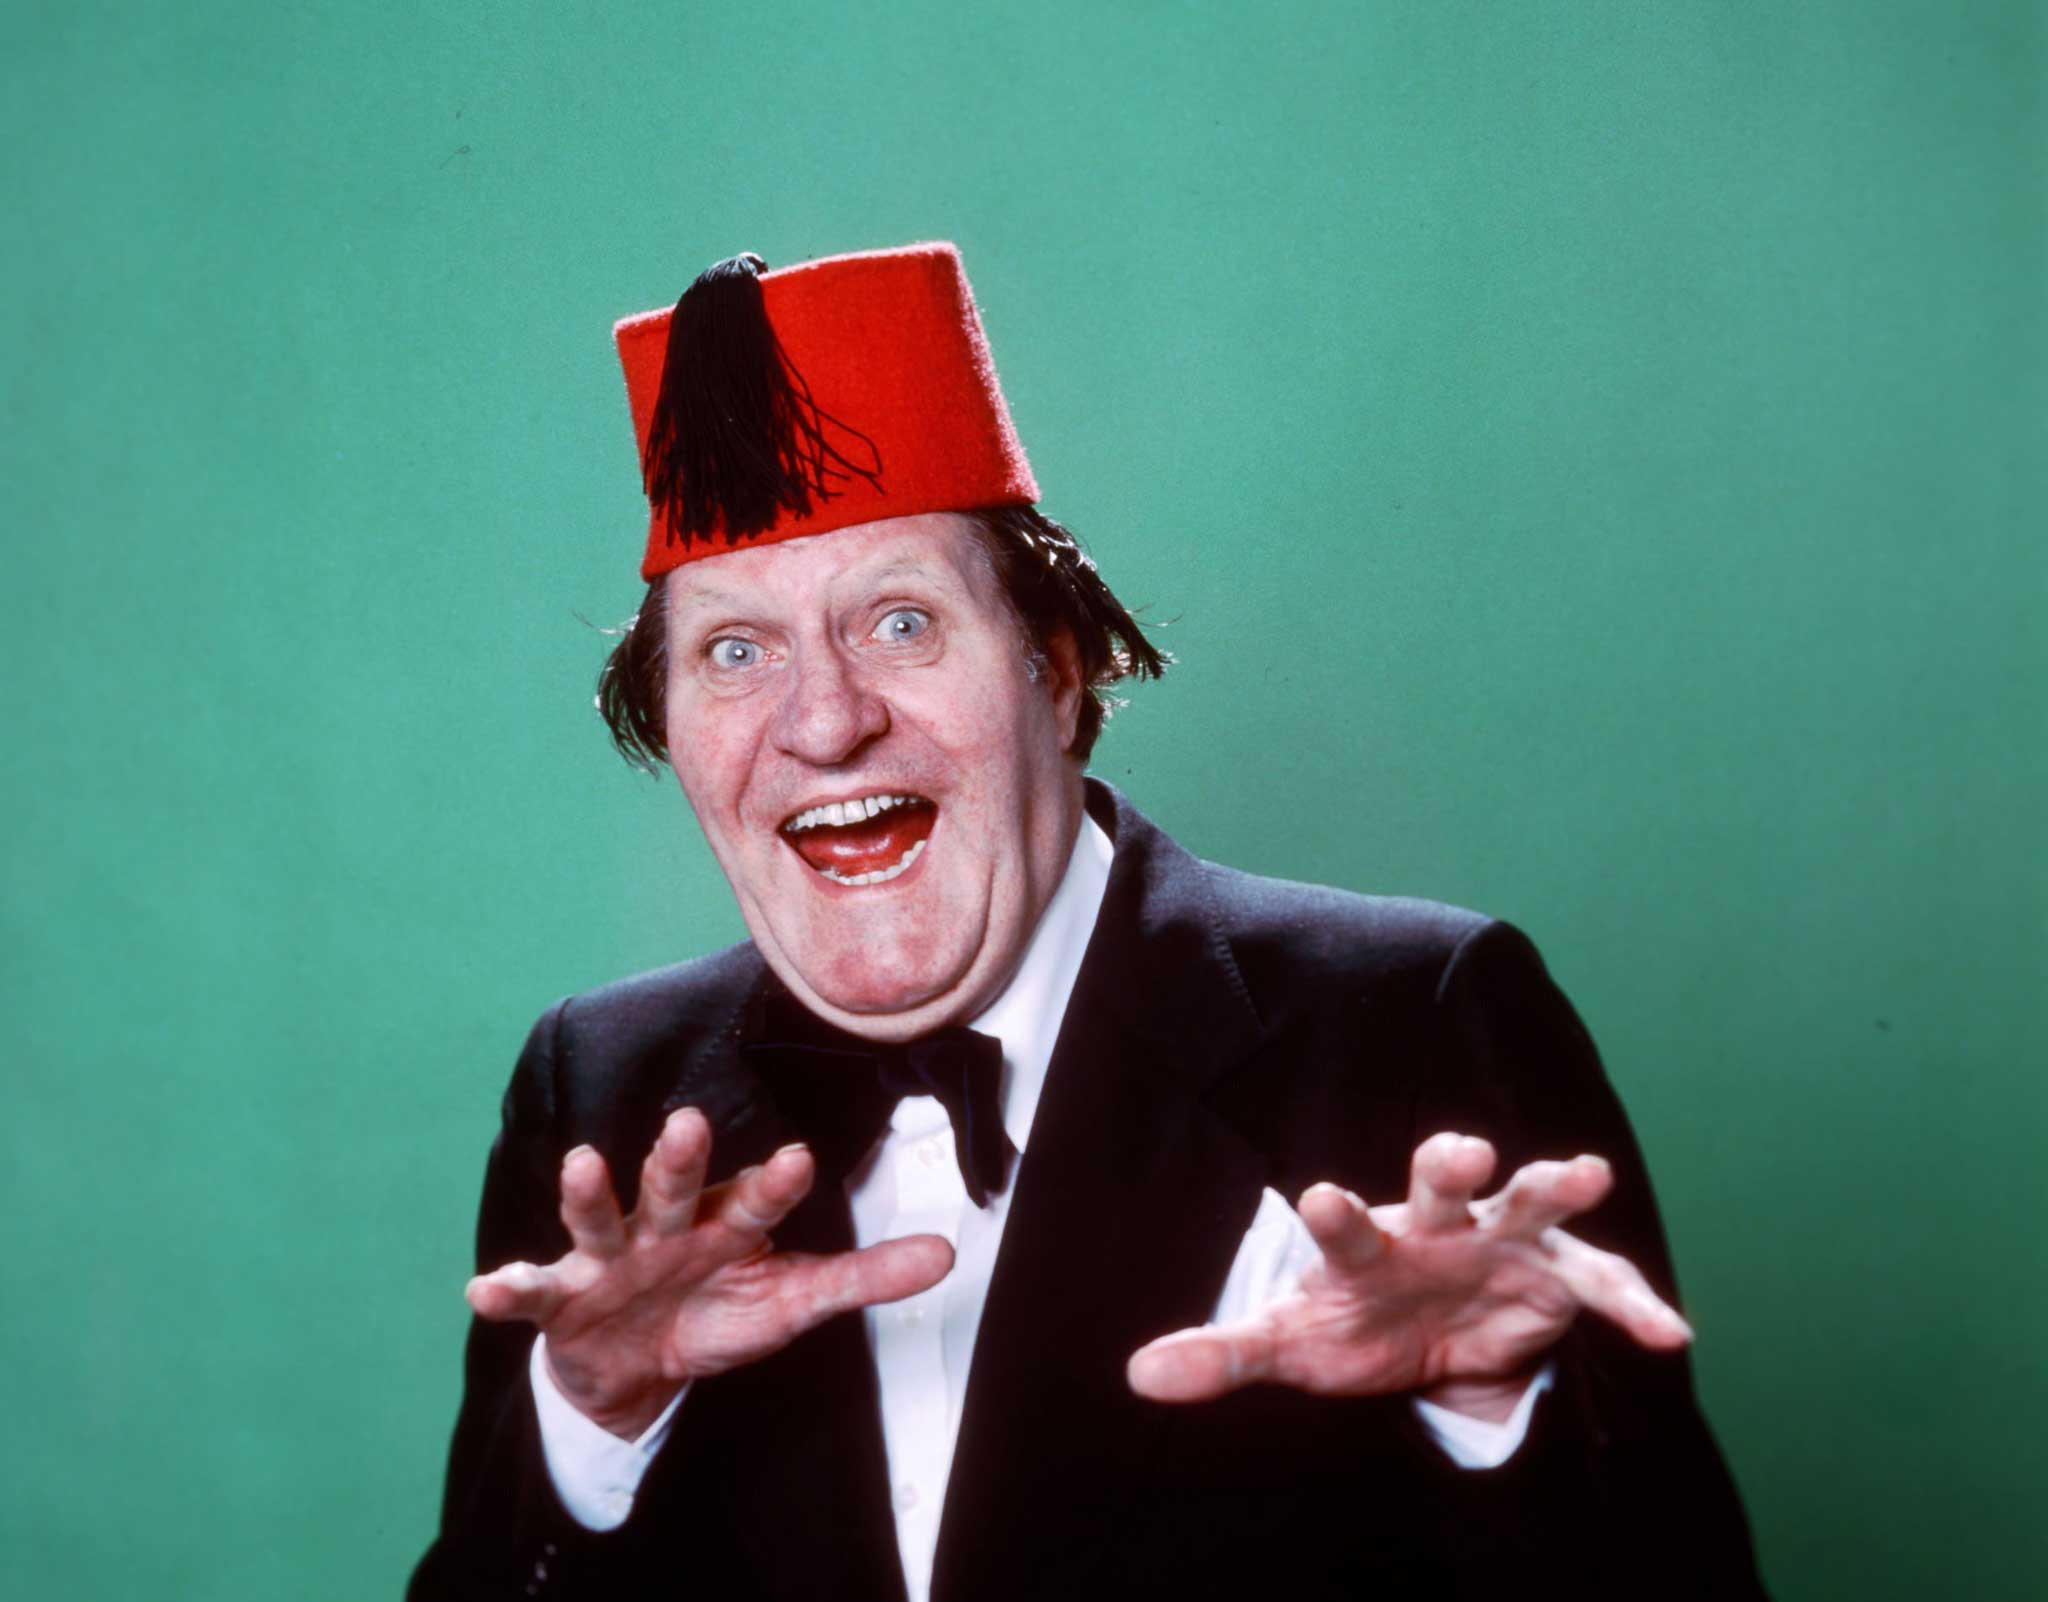 Rhodri Marsden's interesting objects: Comedian Tommy Cooper's trademark fez, The Independent